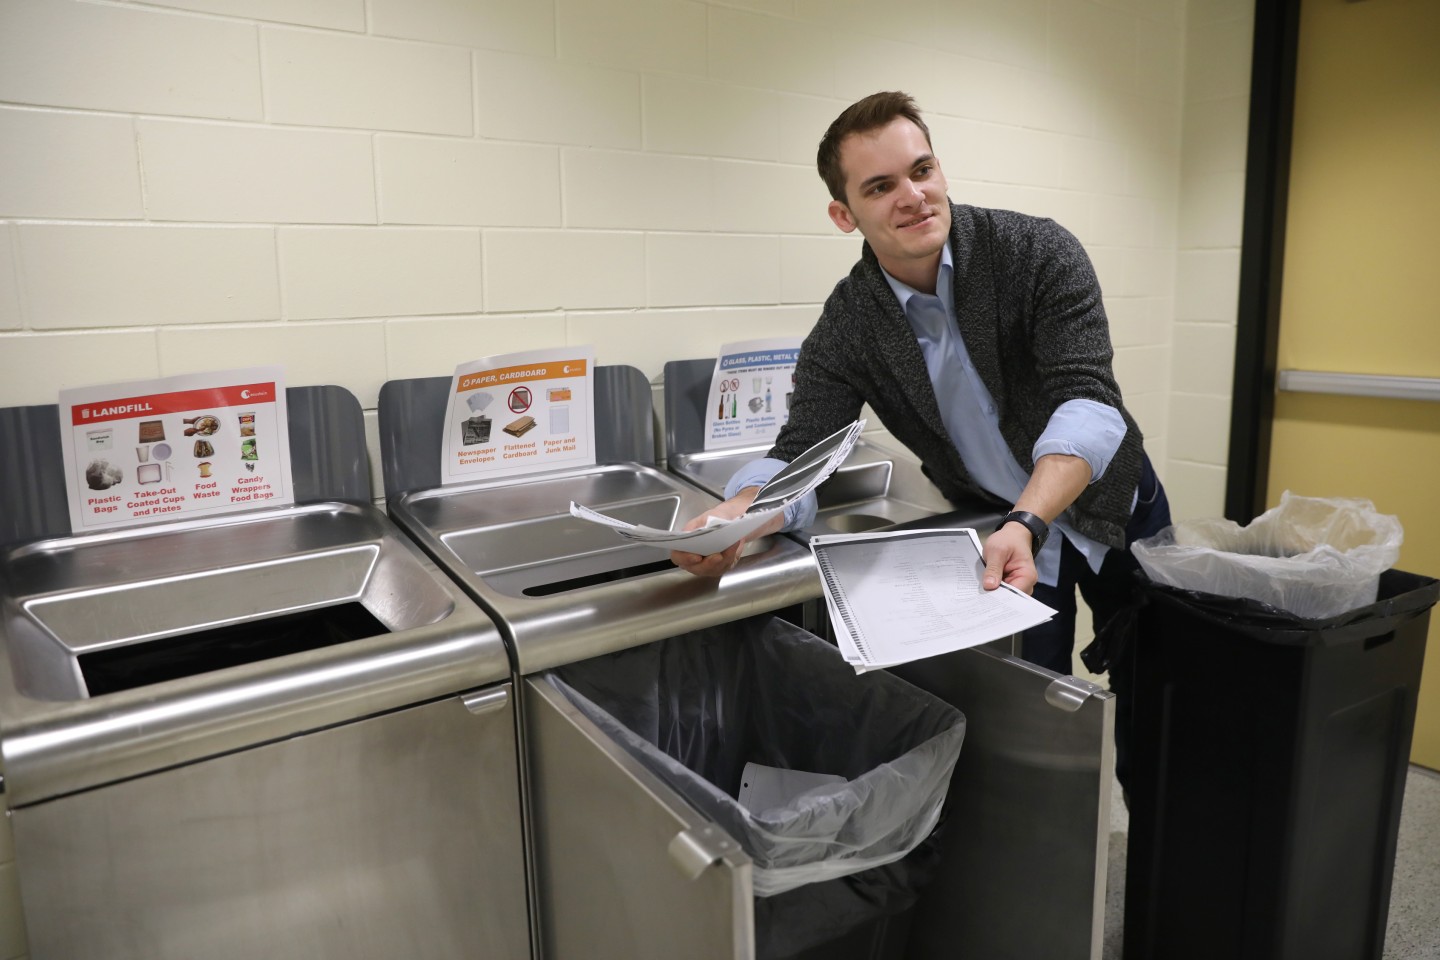 Josh Turske pulls papers out of a recycling bin.